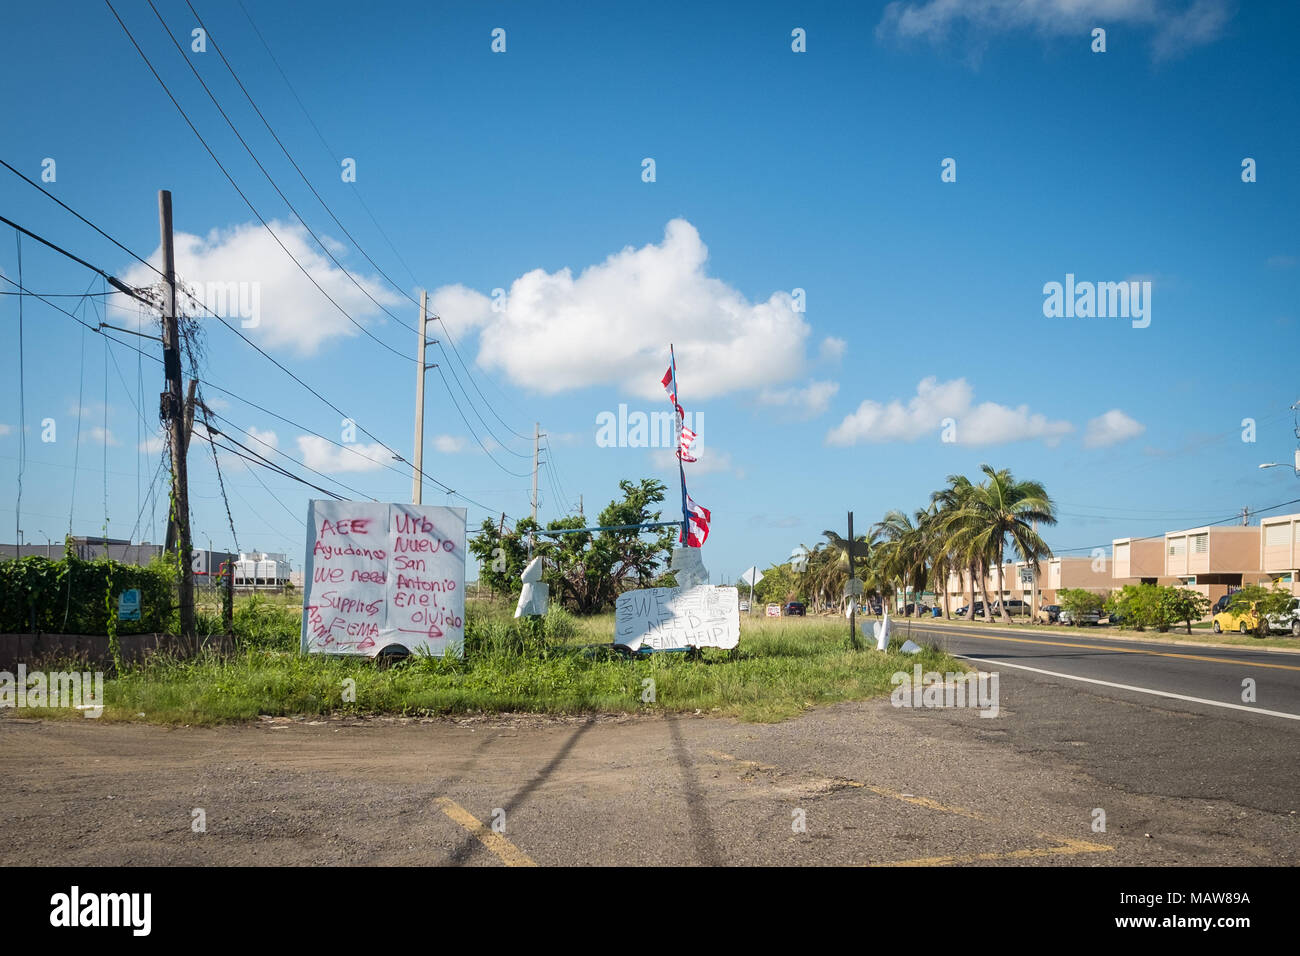 Aguadilla, Puerto Rico. 24th October, 2017. Residents of Aguadilla leave signs out on the main road begging for food and water a month after Hurricane Maria devastated the island, destroying power, transportation and water infrastructure. Credit: Sara Armas/Alamy Reportage Stock Photo